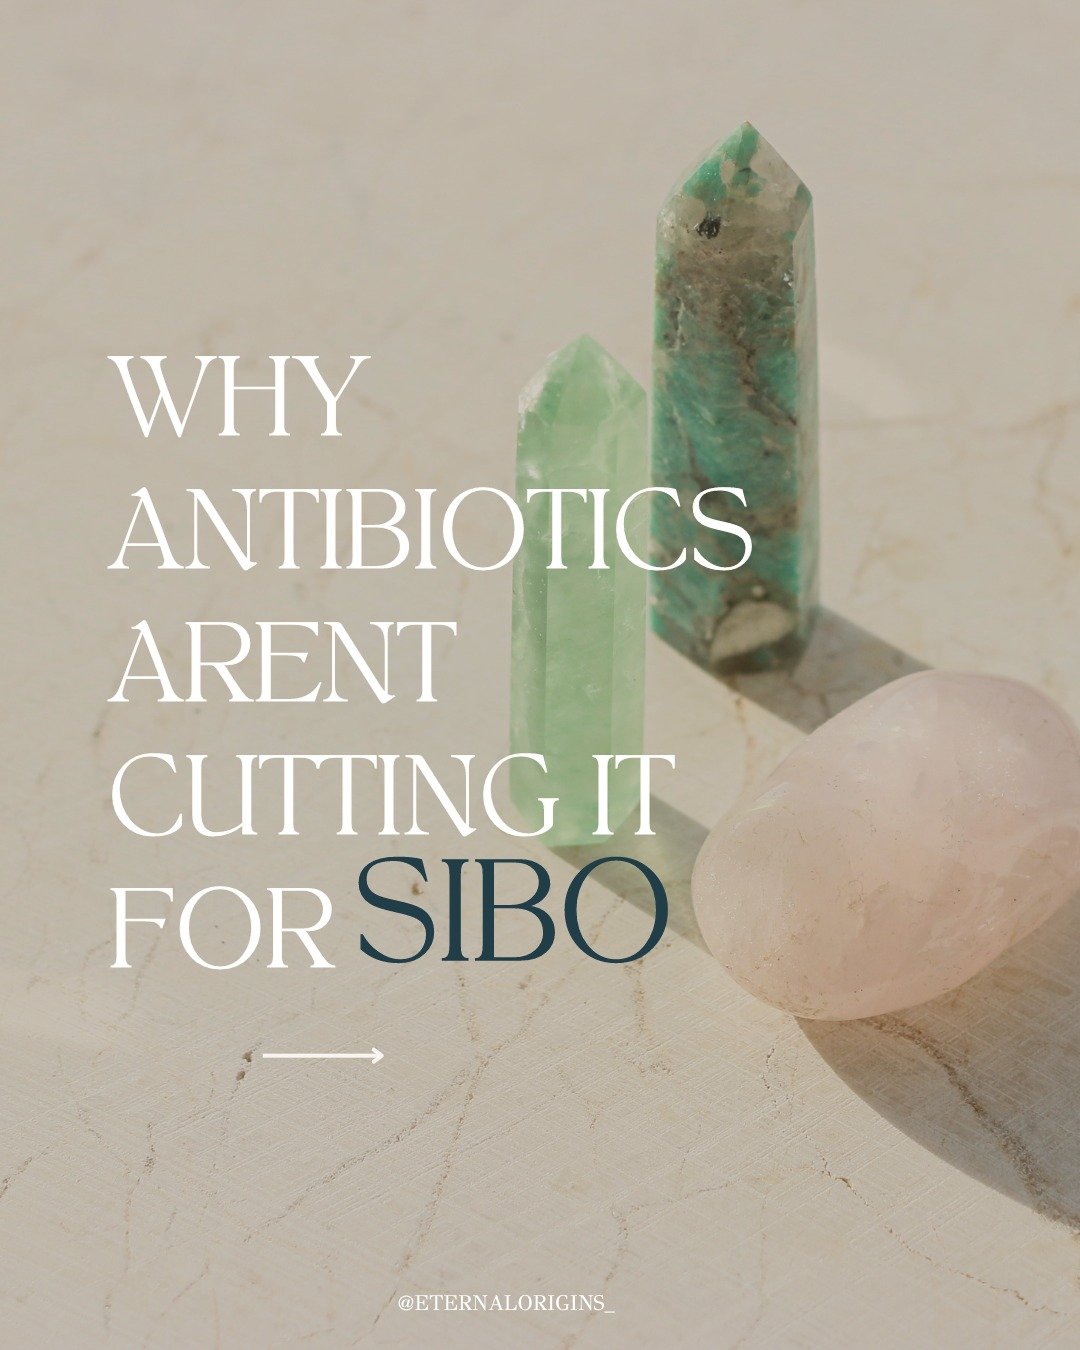 SIBO is much more common than people think..

Symptoms like bloat, gas, food sensitivities, &quot;IBS&quot;, histamine intolerance, brain fog, acne, etc... can all be signs of SIBO.

When the digestive system starts to malfunction, many individuals a